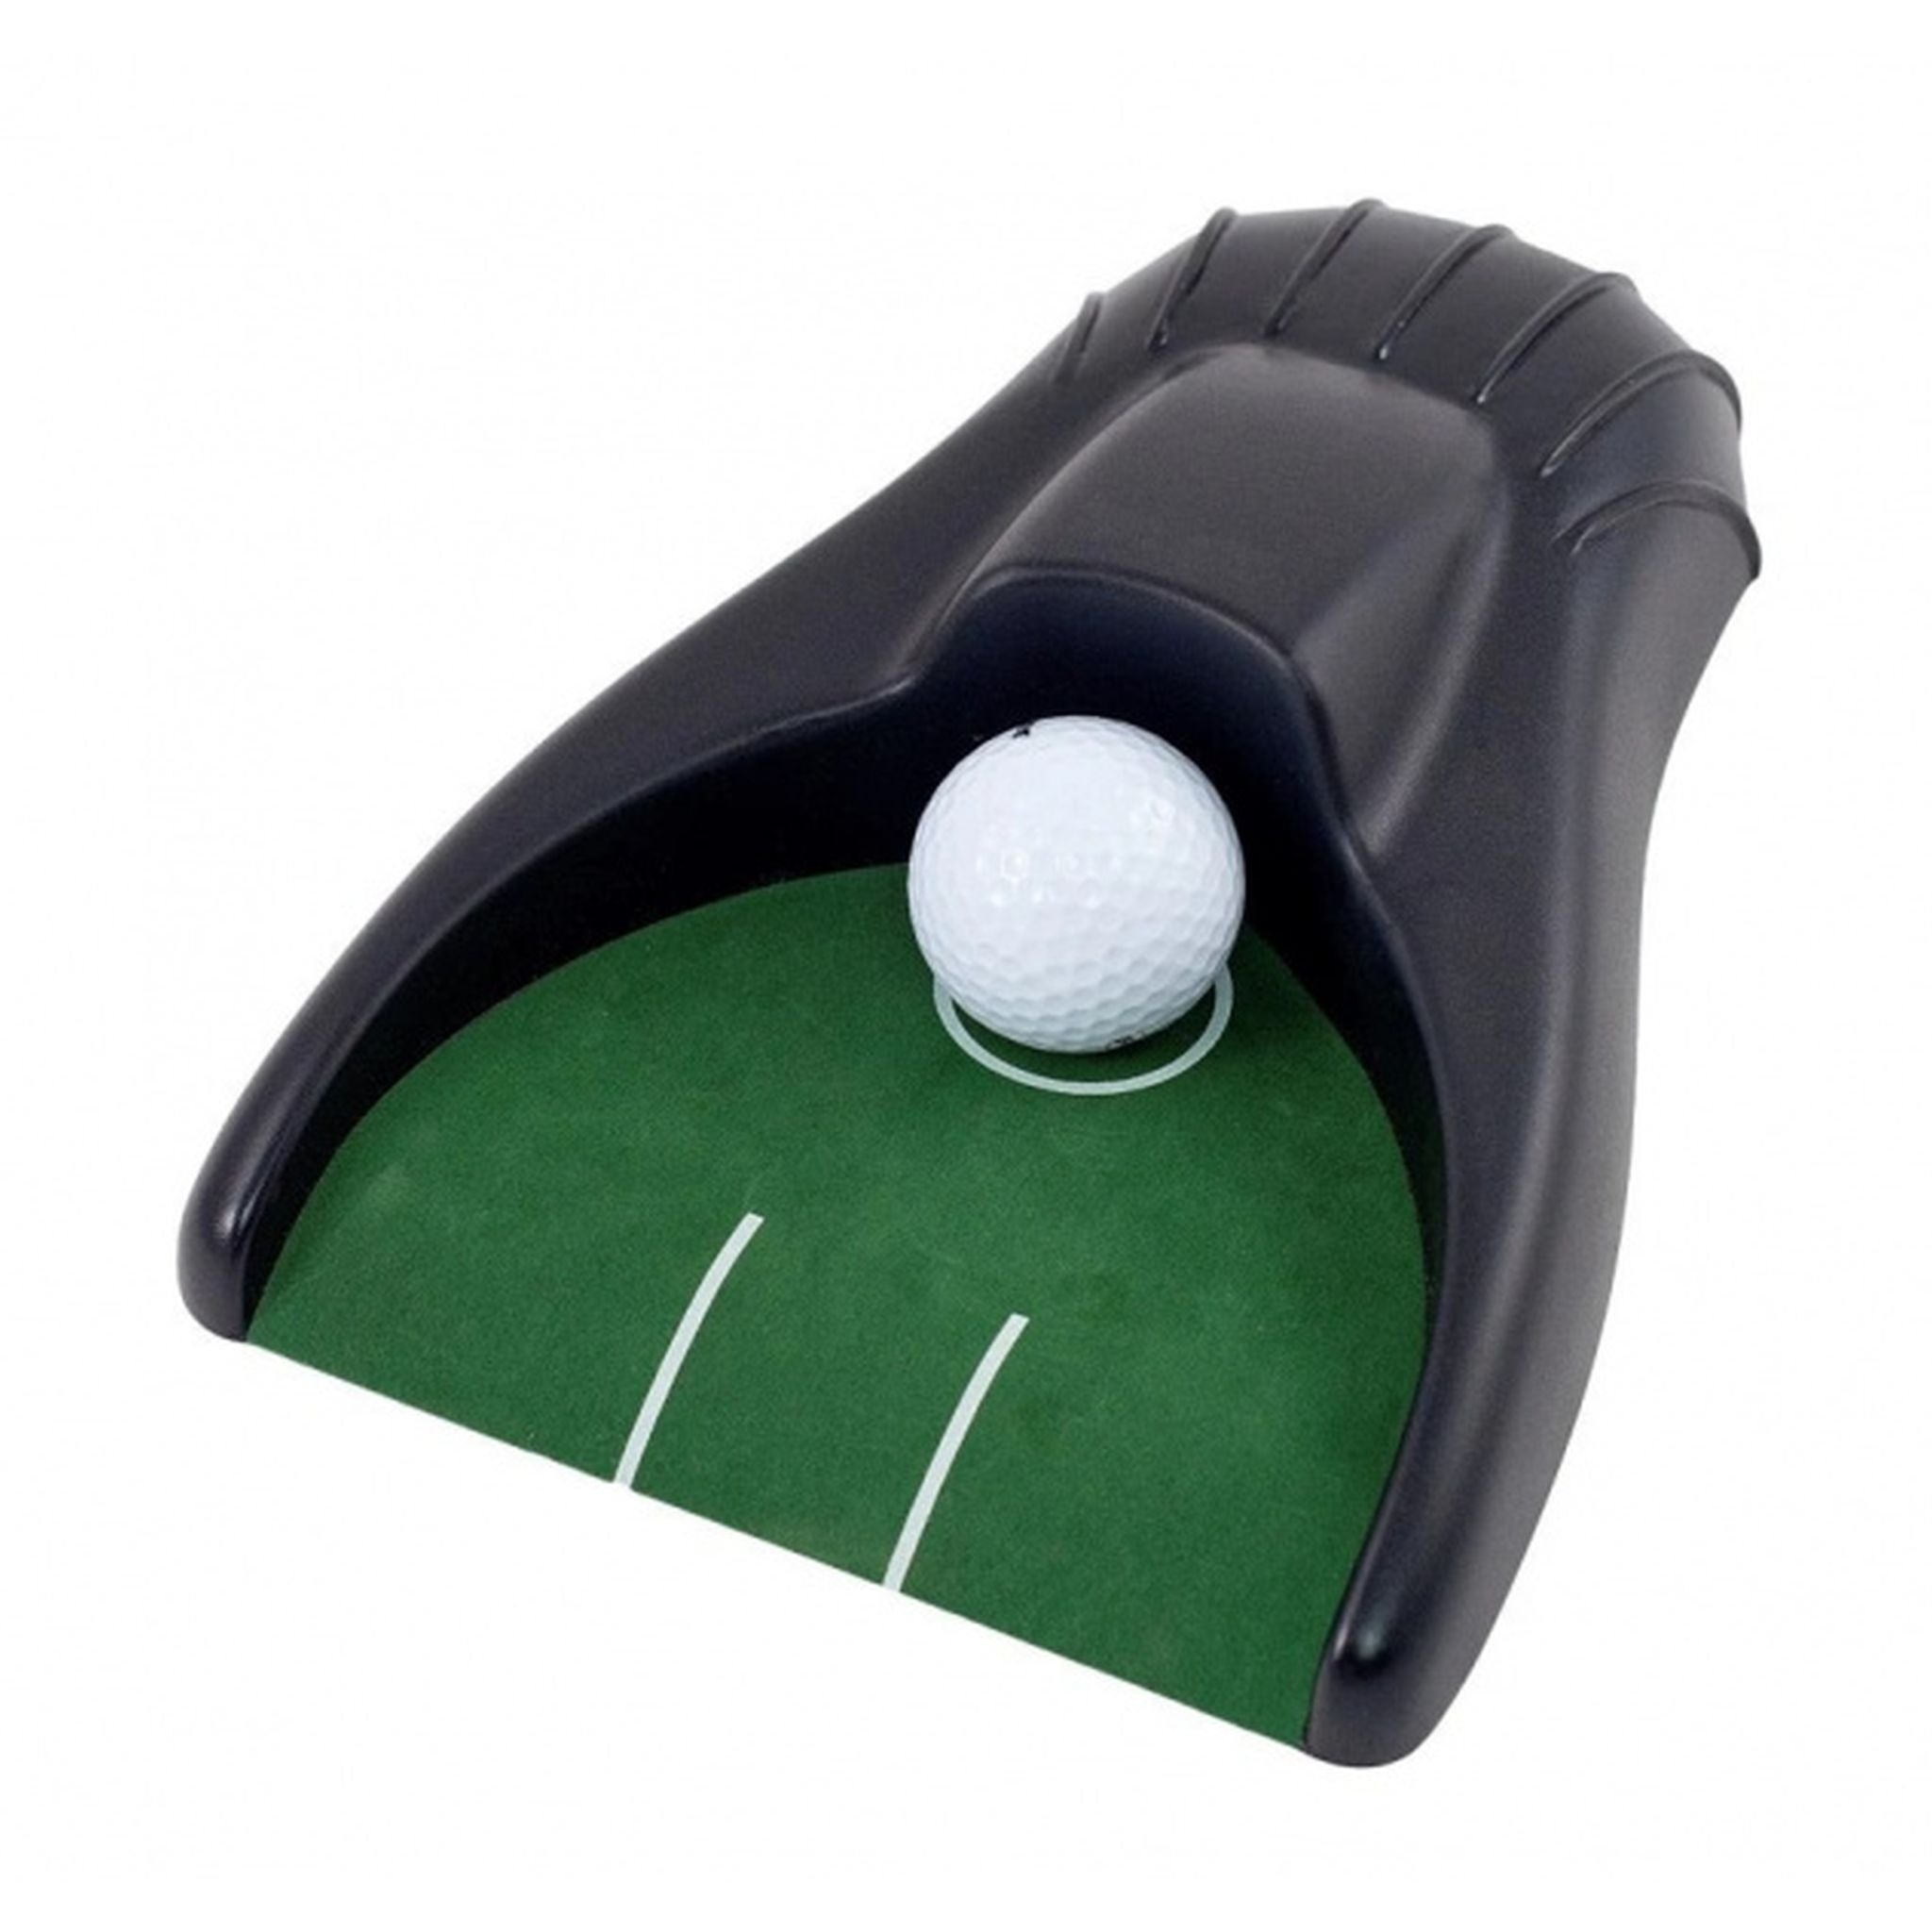 Optima Battery Operated Putting Cup